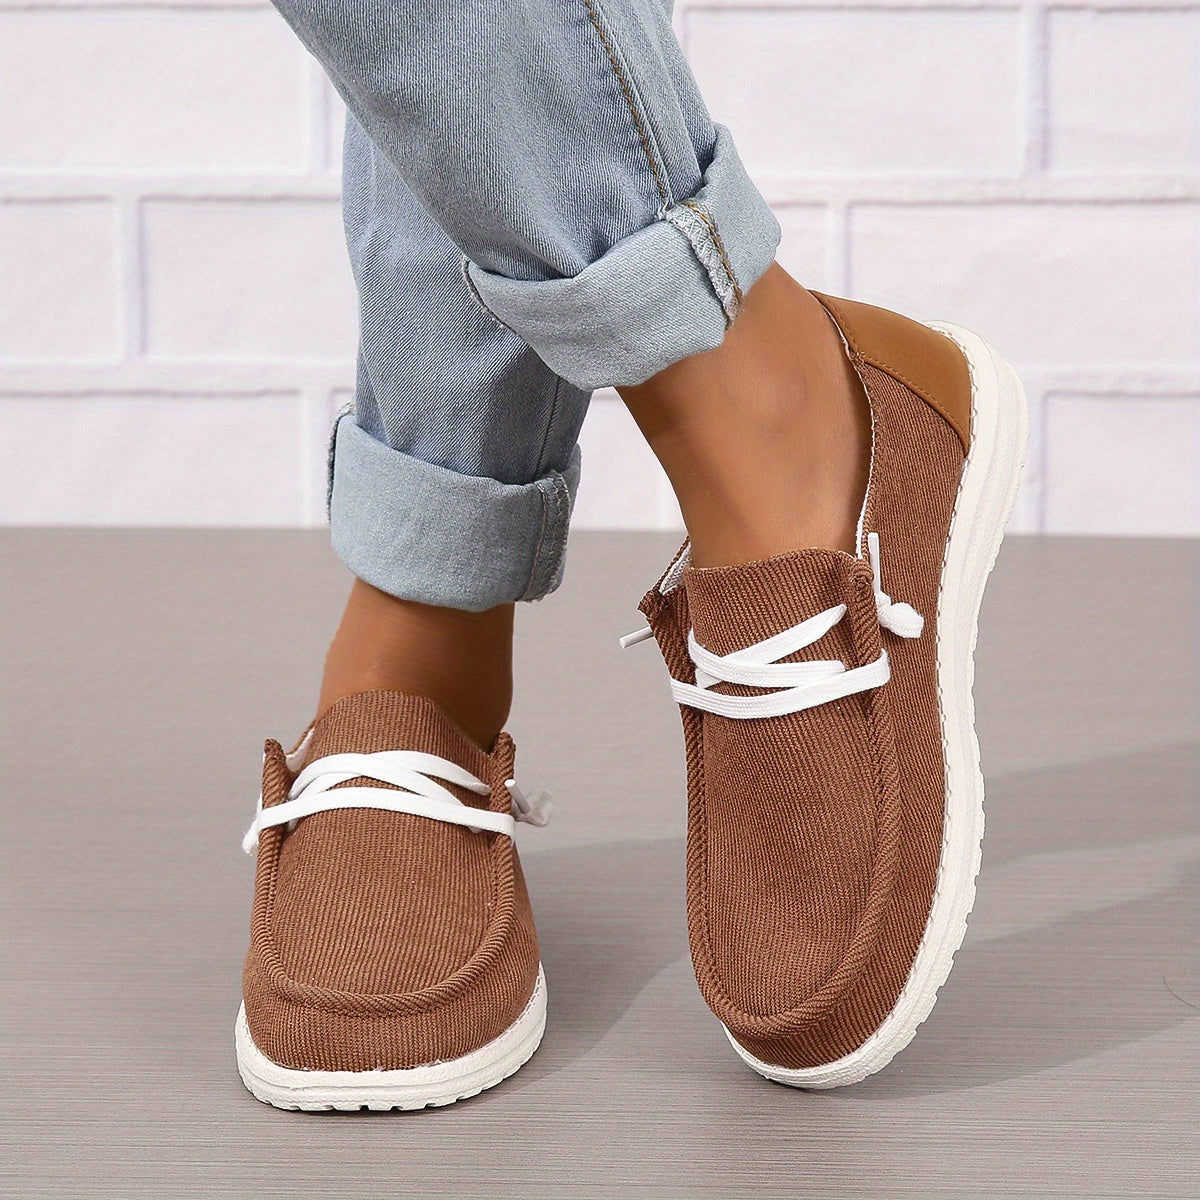 Low Top Corduroy Shoes, Comfy Slip On Walking Loafers